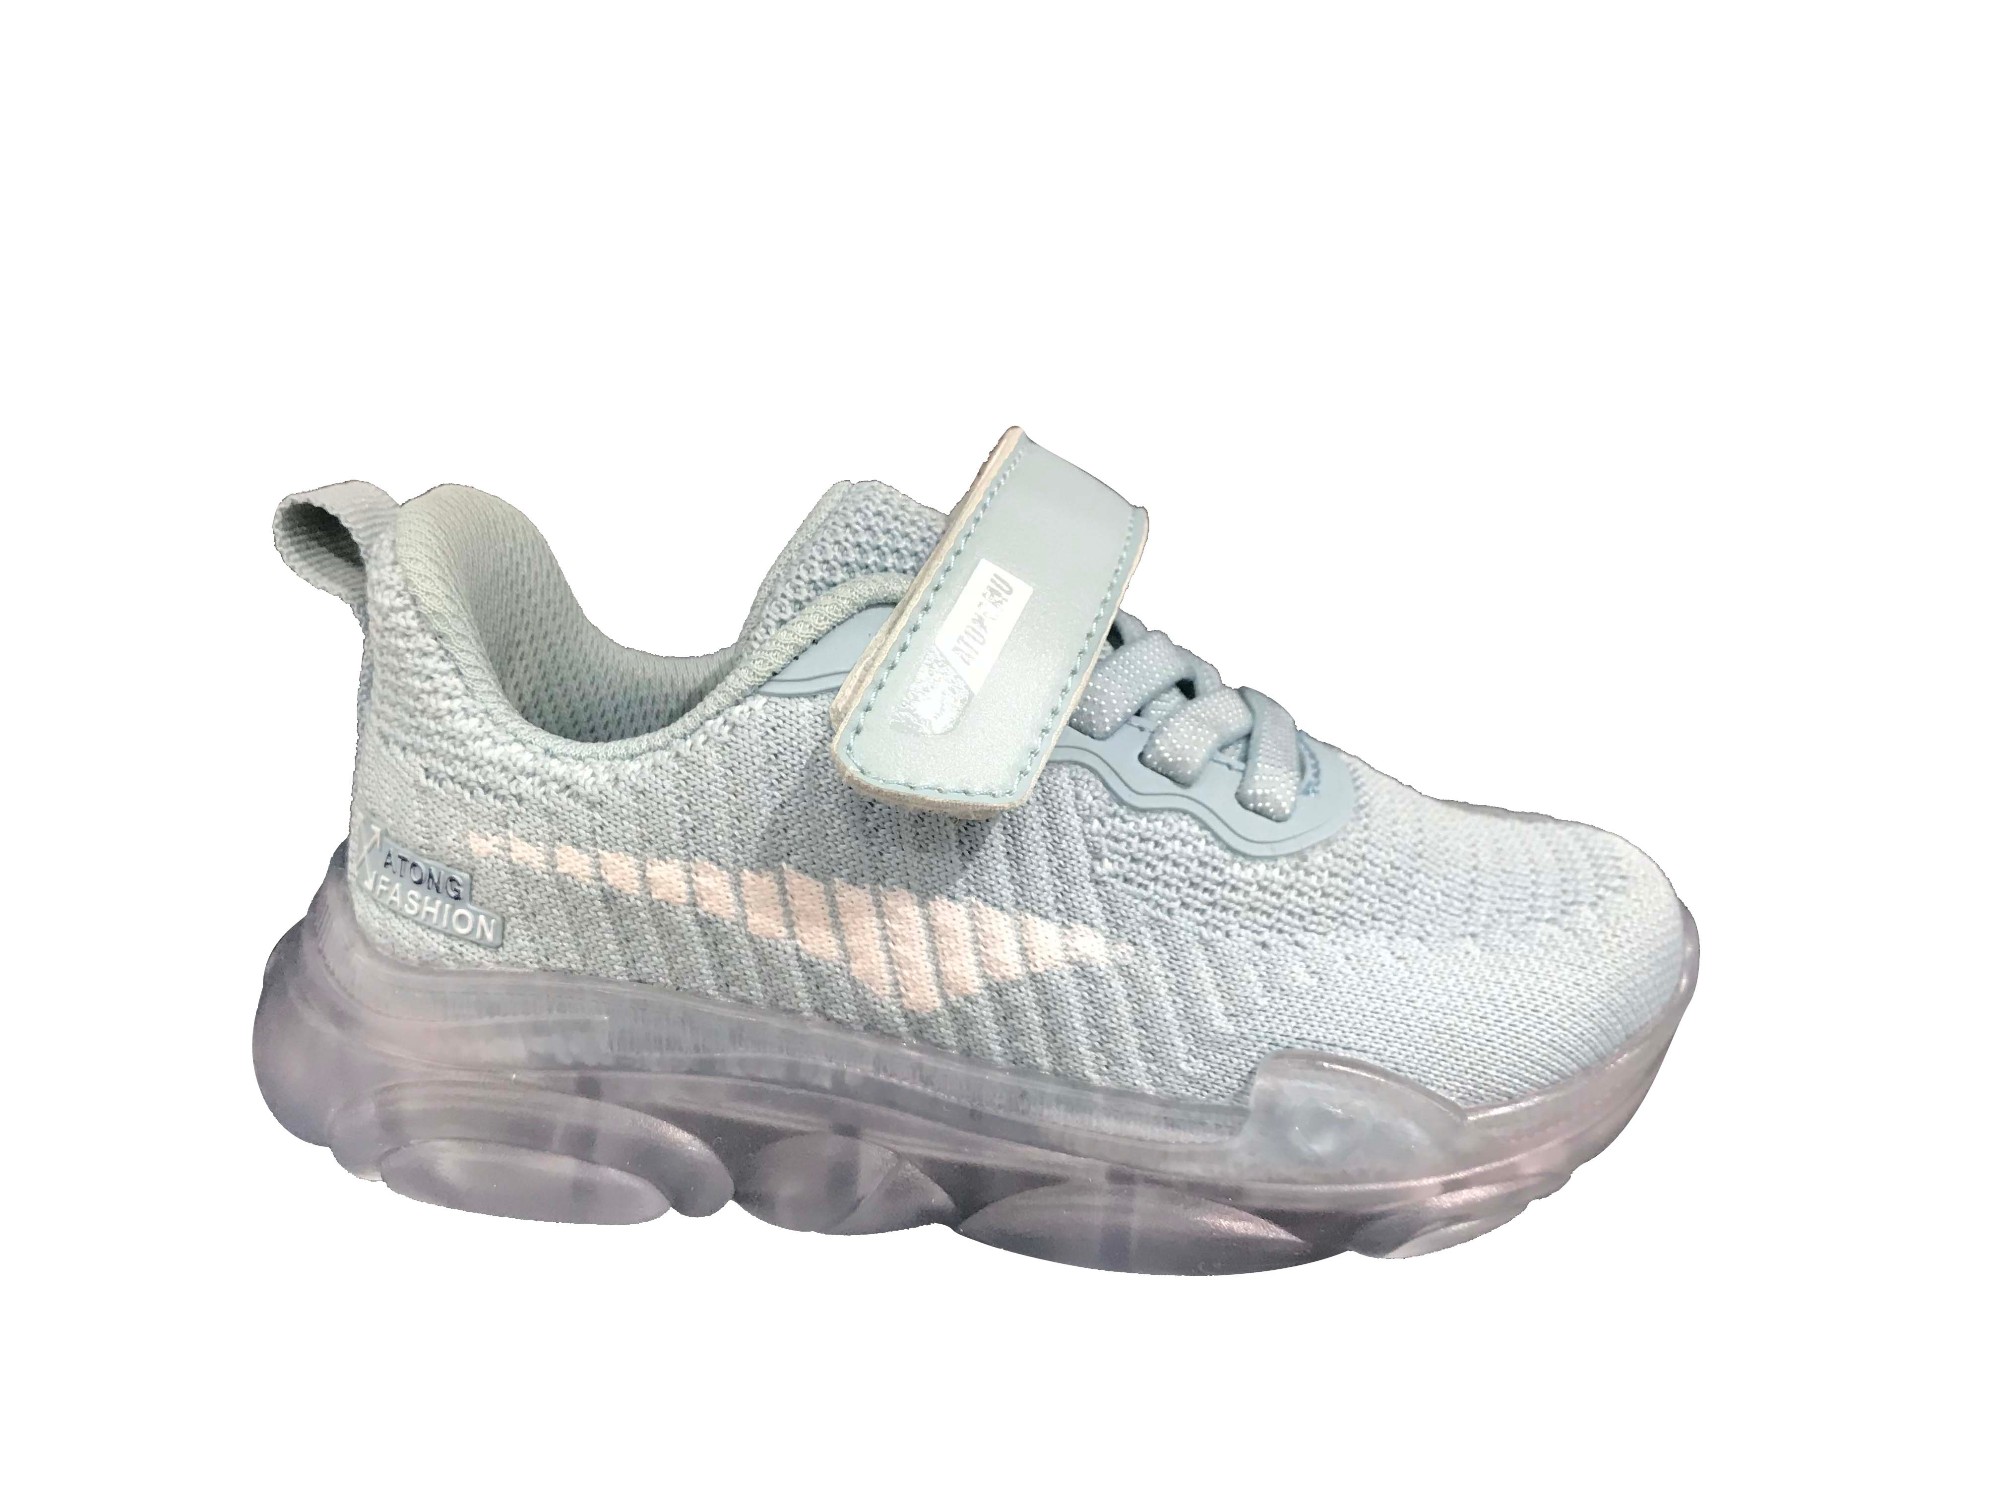 Fashion style kids Casual shoes Flykniting children sport shoes Manufacturers, Fashion style kids Casual shoes Flykniting children sport shoes Factory, Supply Fashion style kids Casual shoes Flykniting children sport shoes